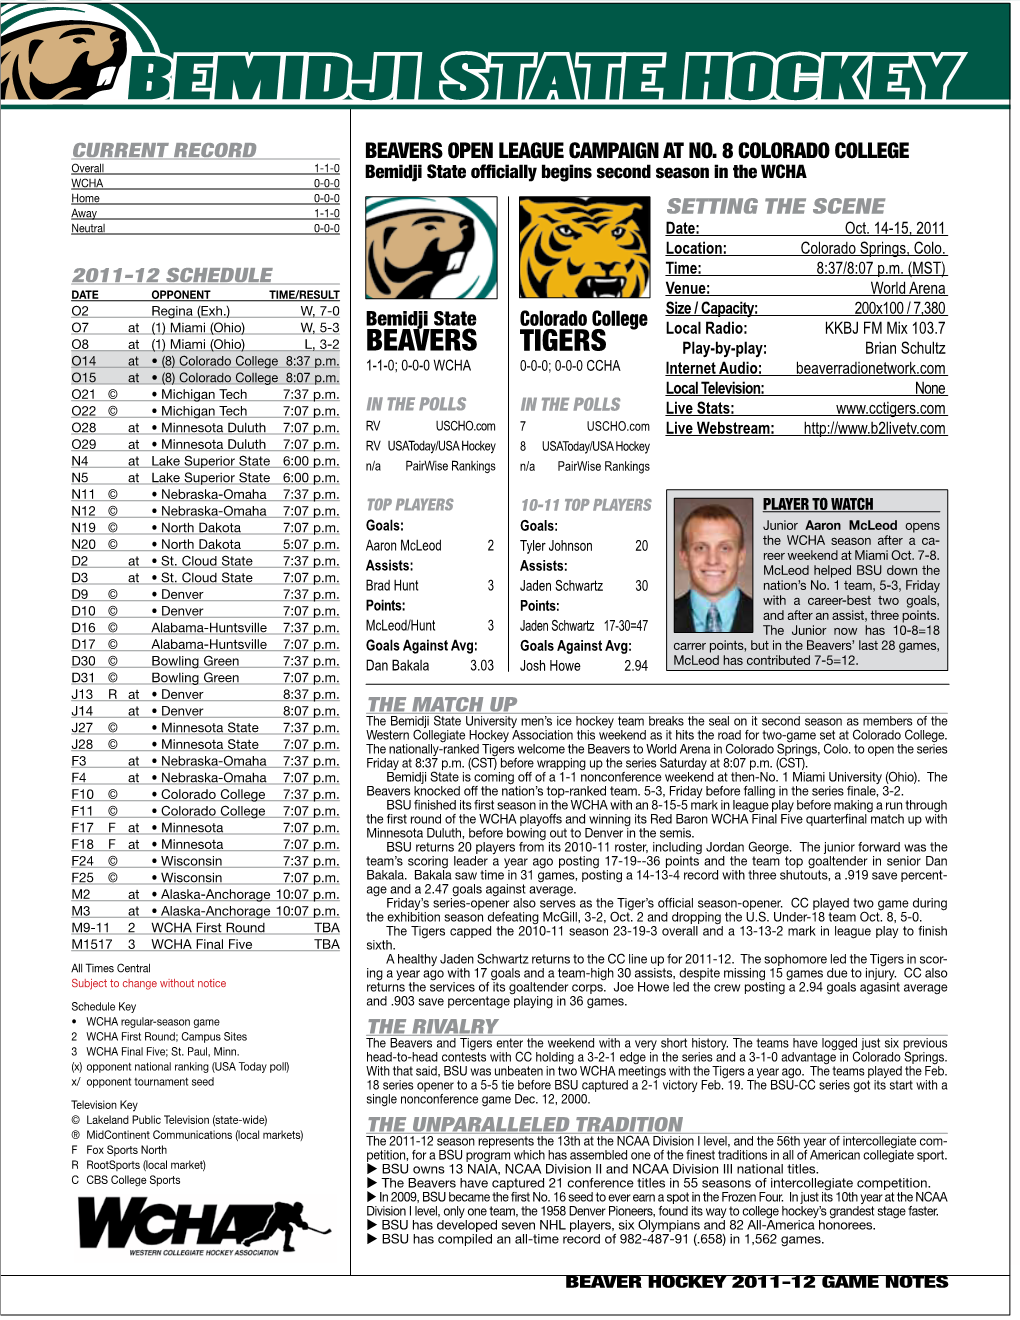 BSU's Game Notes